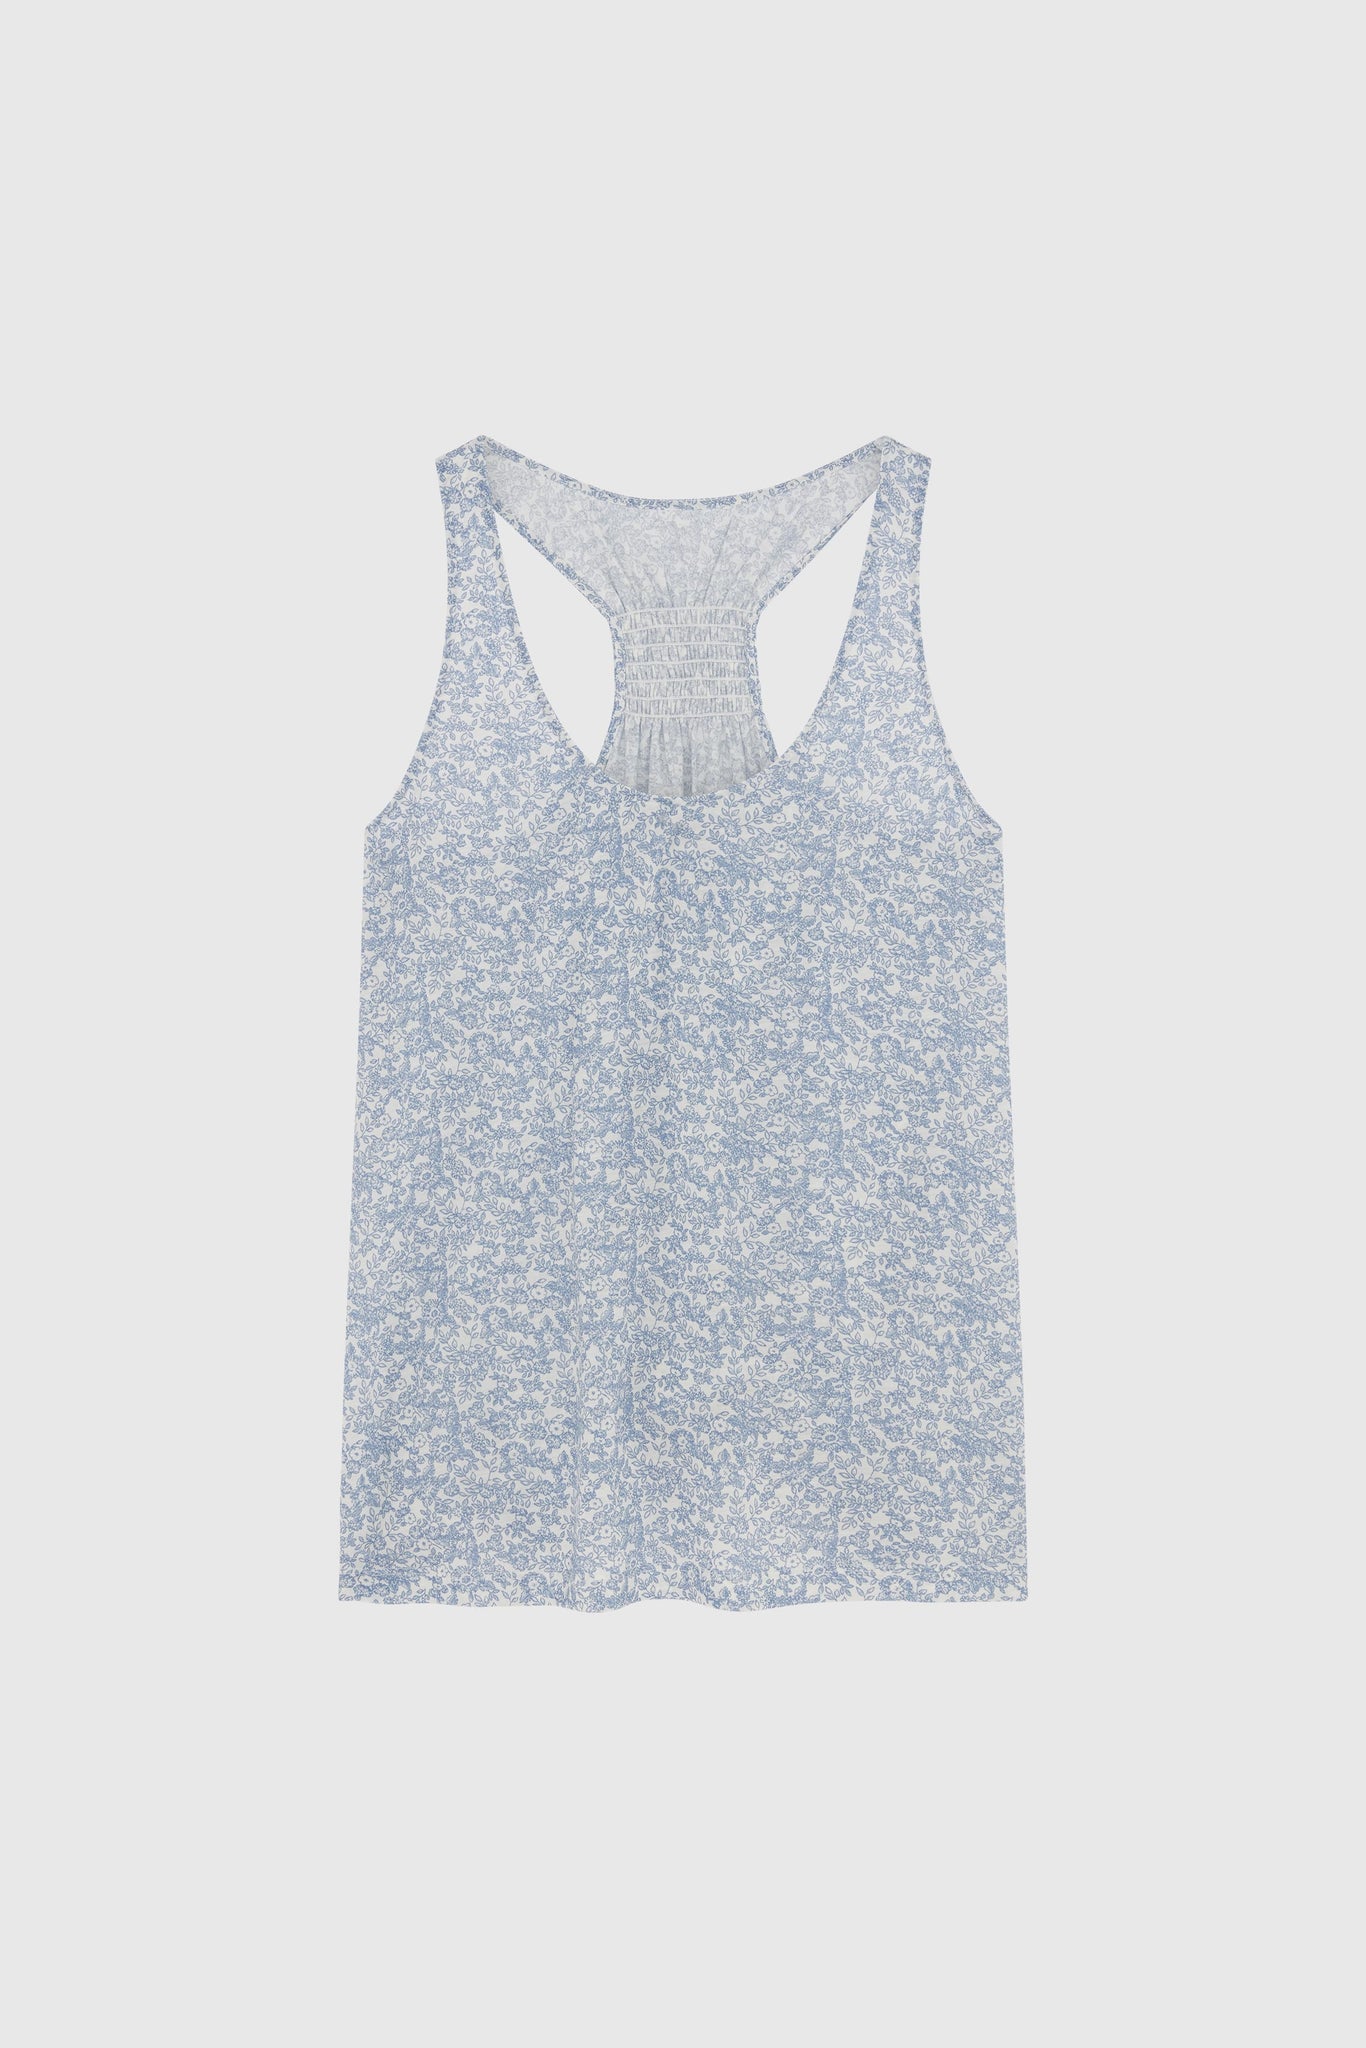 Women's Patterned Sports Sleeveless Scoop Neck Tank Top by Lavender Hill Clothing